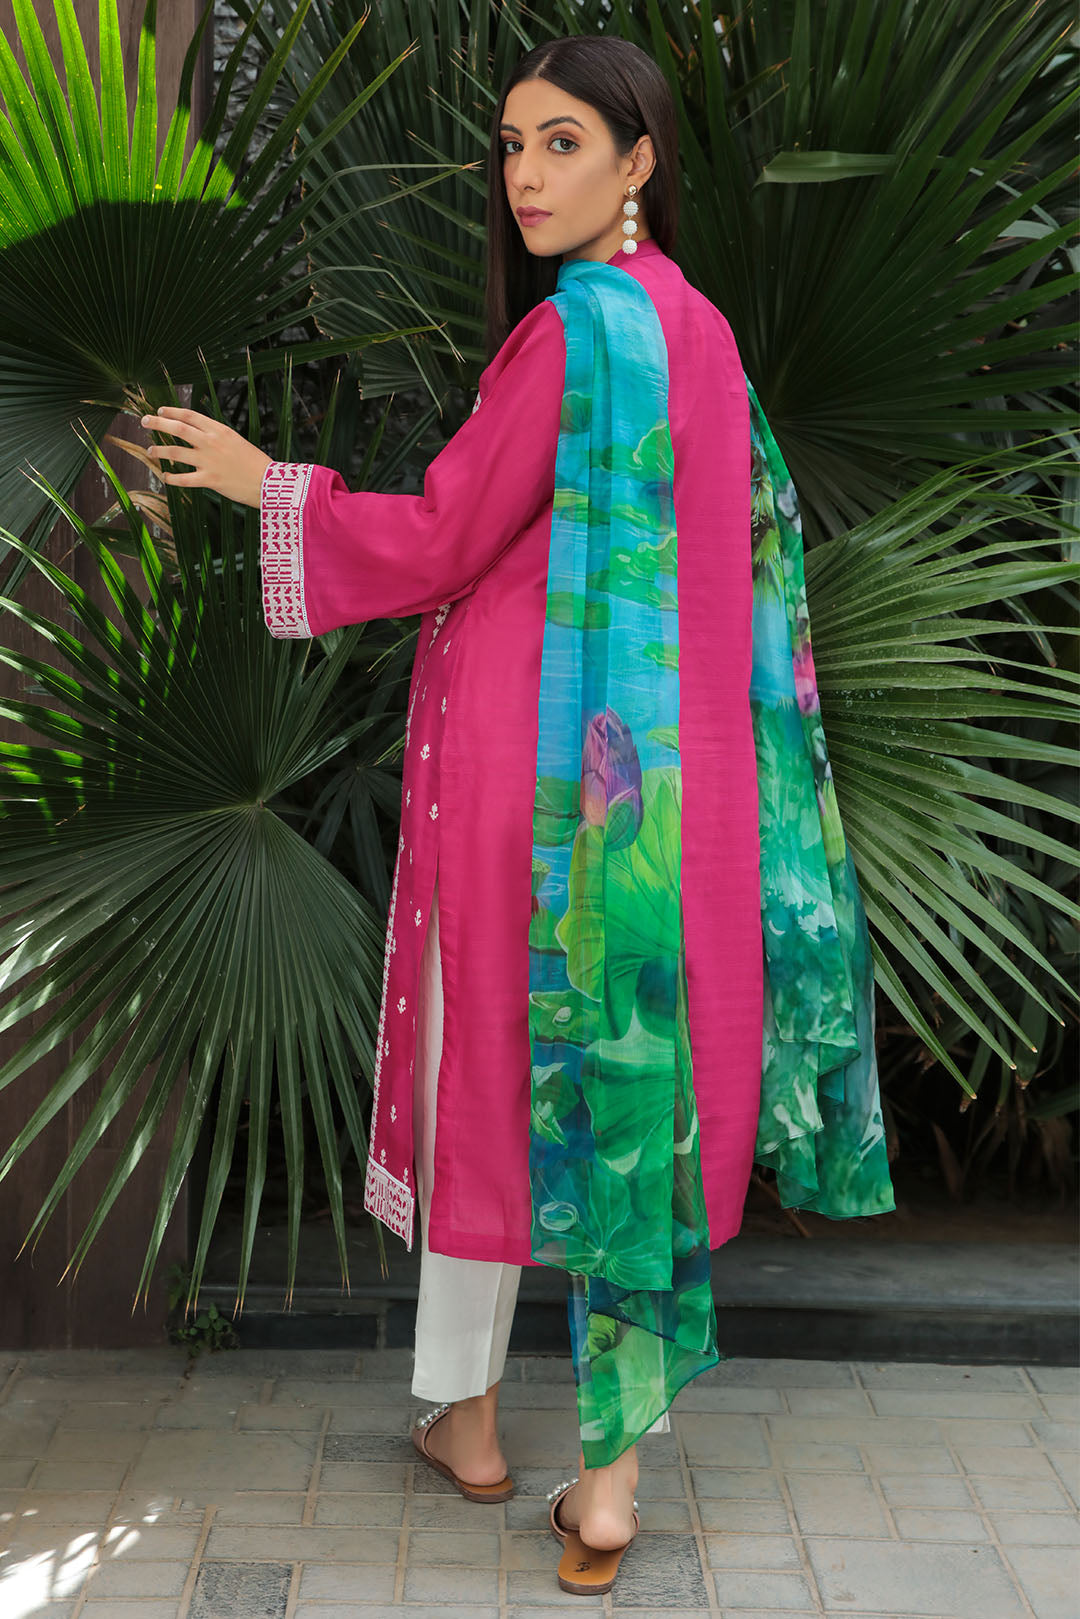 2PC Dyed Embroidery Texture Lawn Shirt with Chiffon Dupata P2627